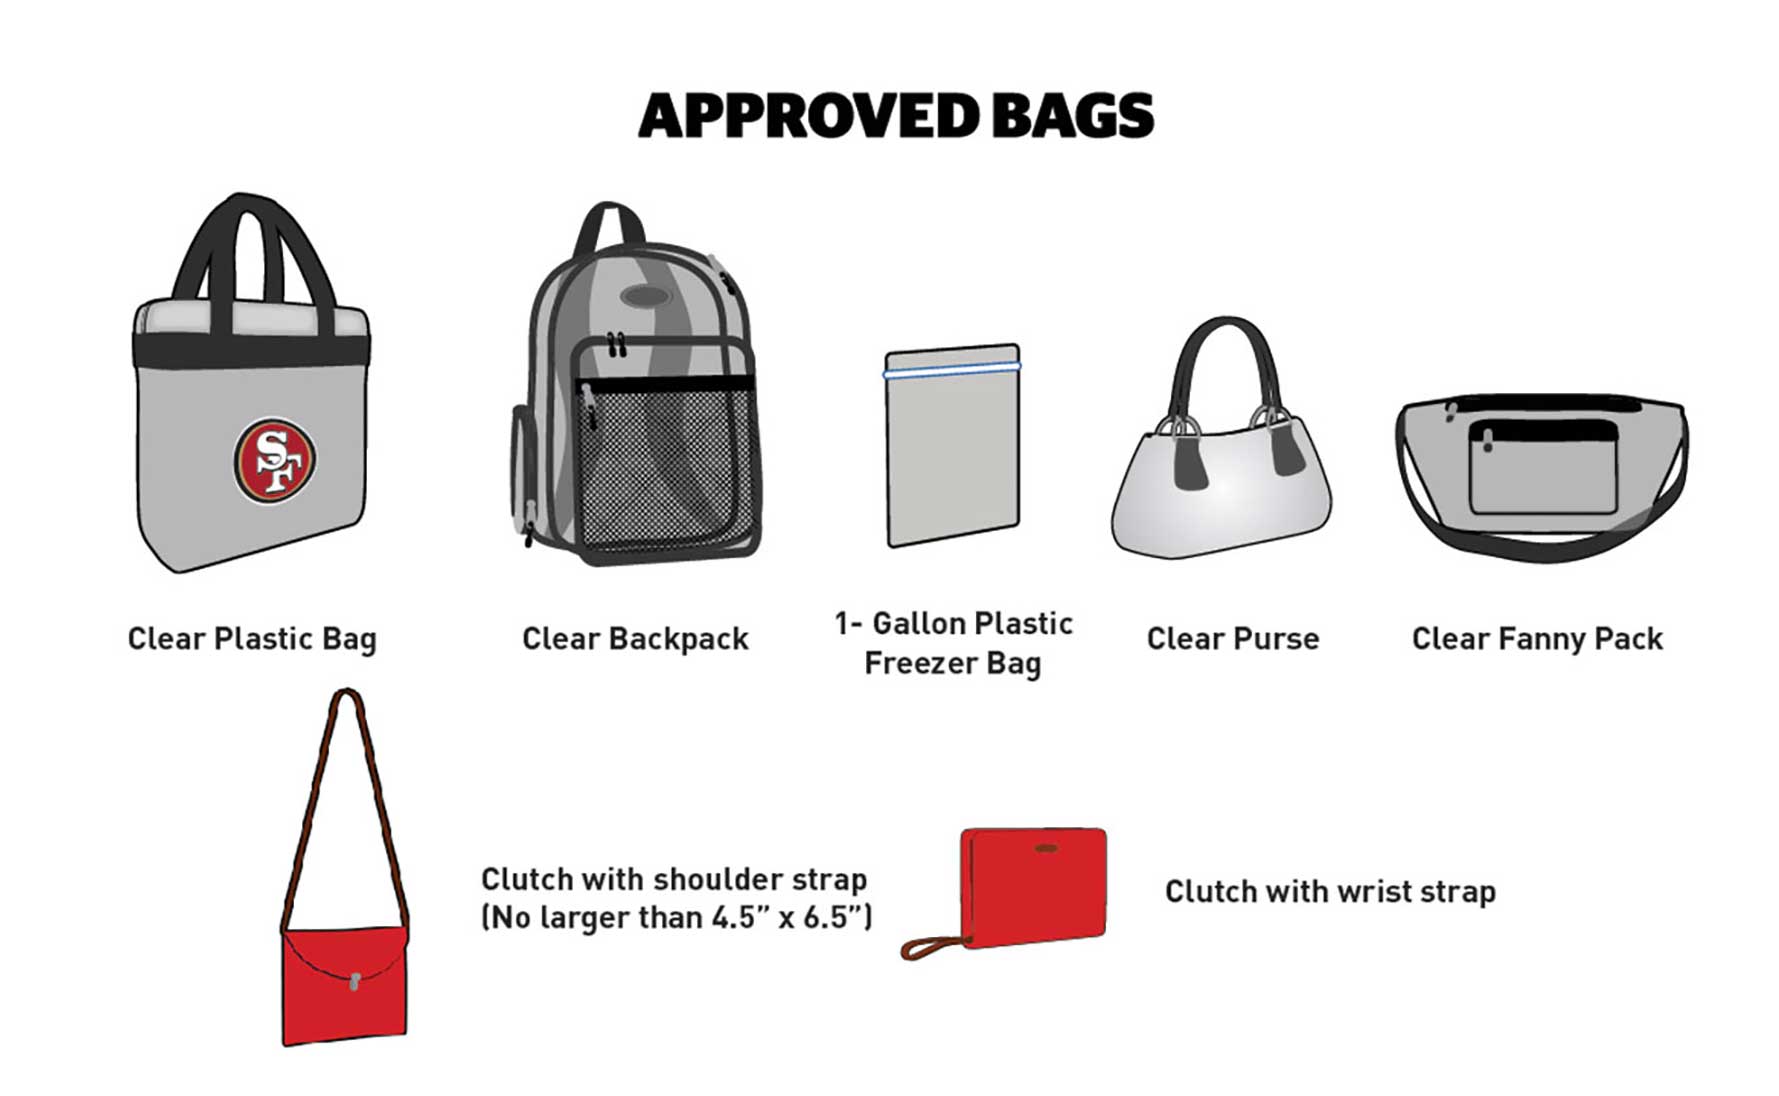 An illustration of the different types of bags approved for entry into Levi's stadium.